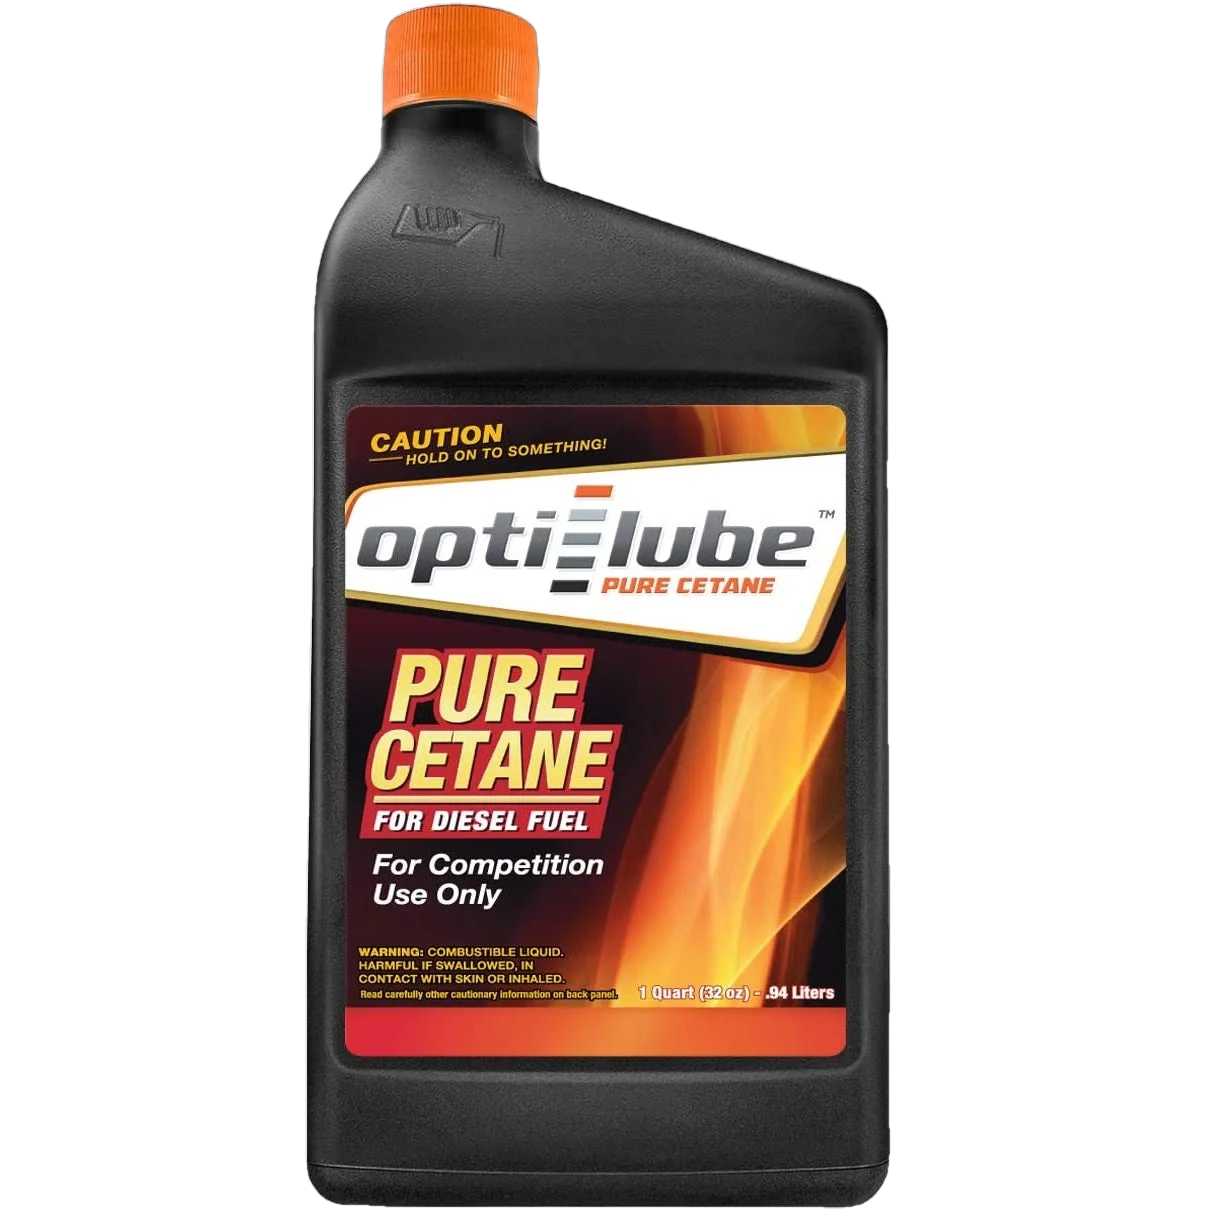 Opti-Lube Pure Cetane Diesel Fuel Additive for Competition Use: Quart